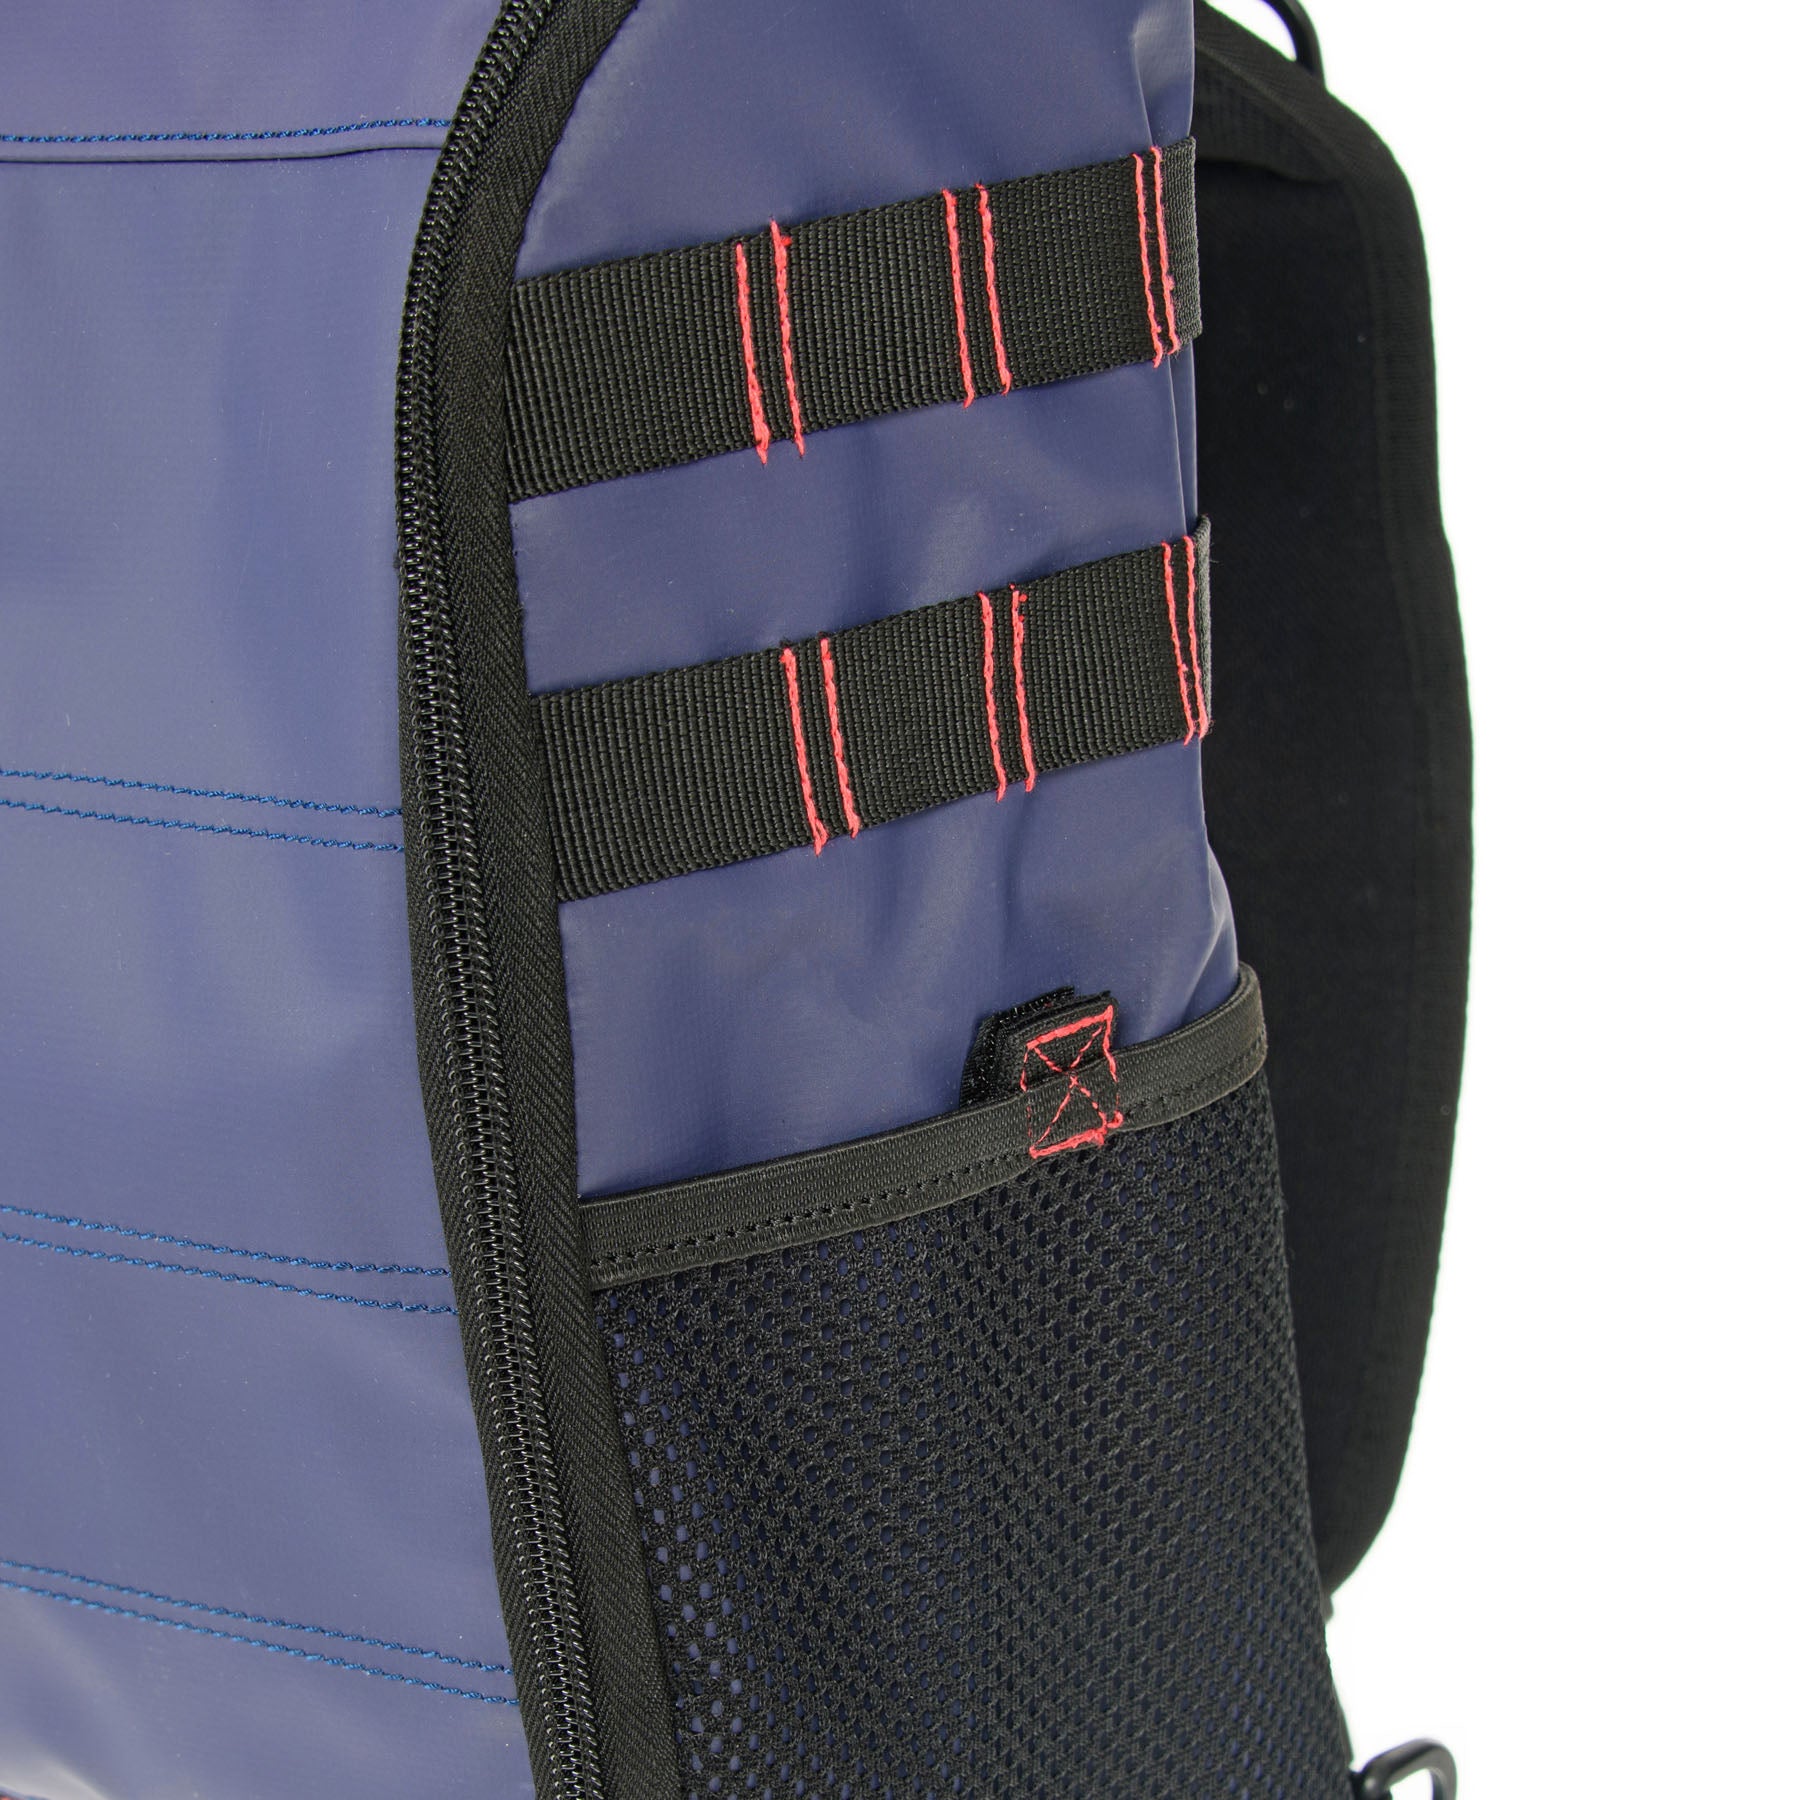 Tuff-Tool-Bags-The-Sling-Hydration-Tool-Bag-lockable-back-pack-outside-pockets